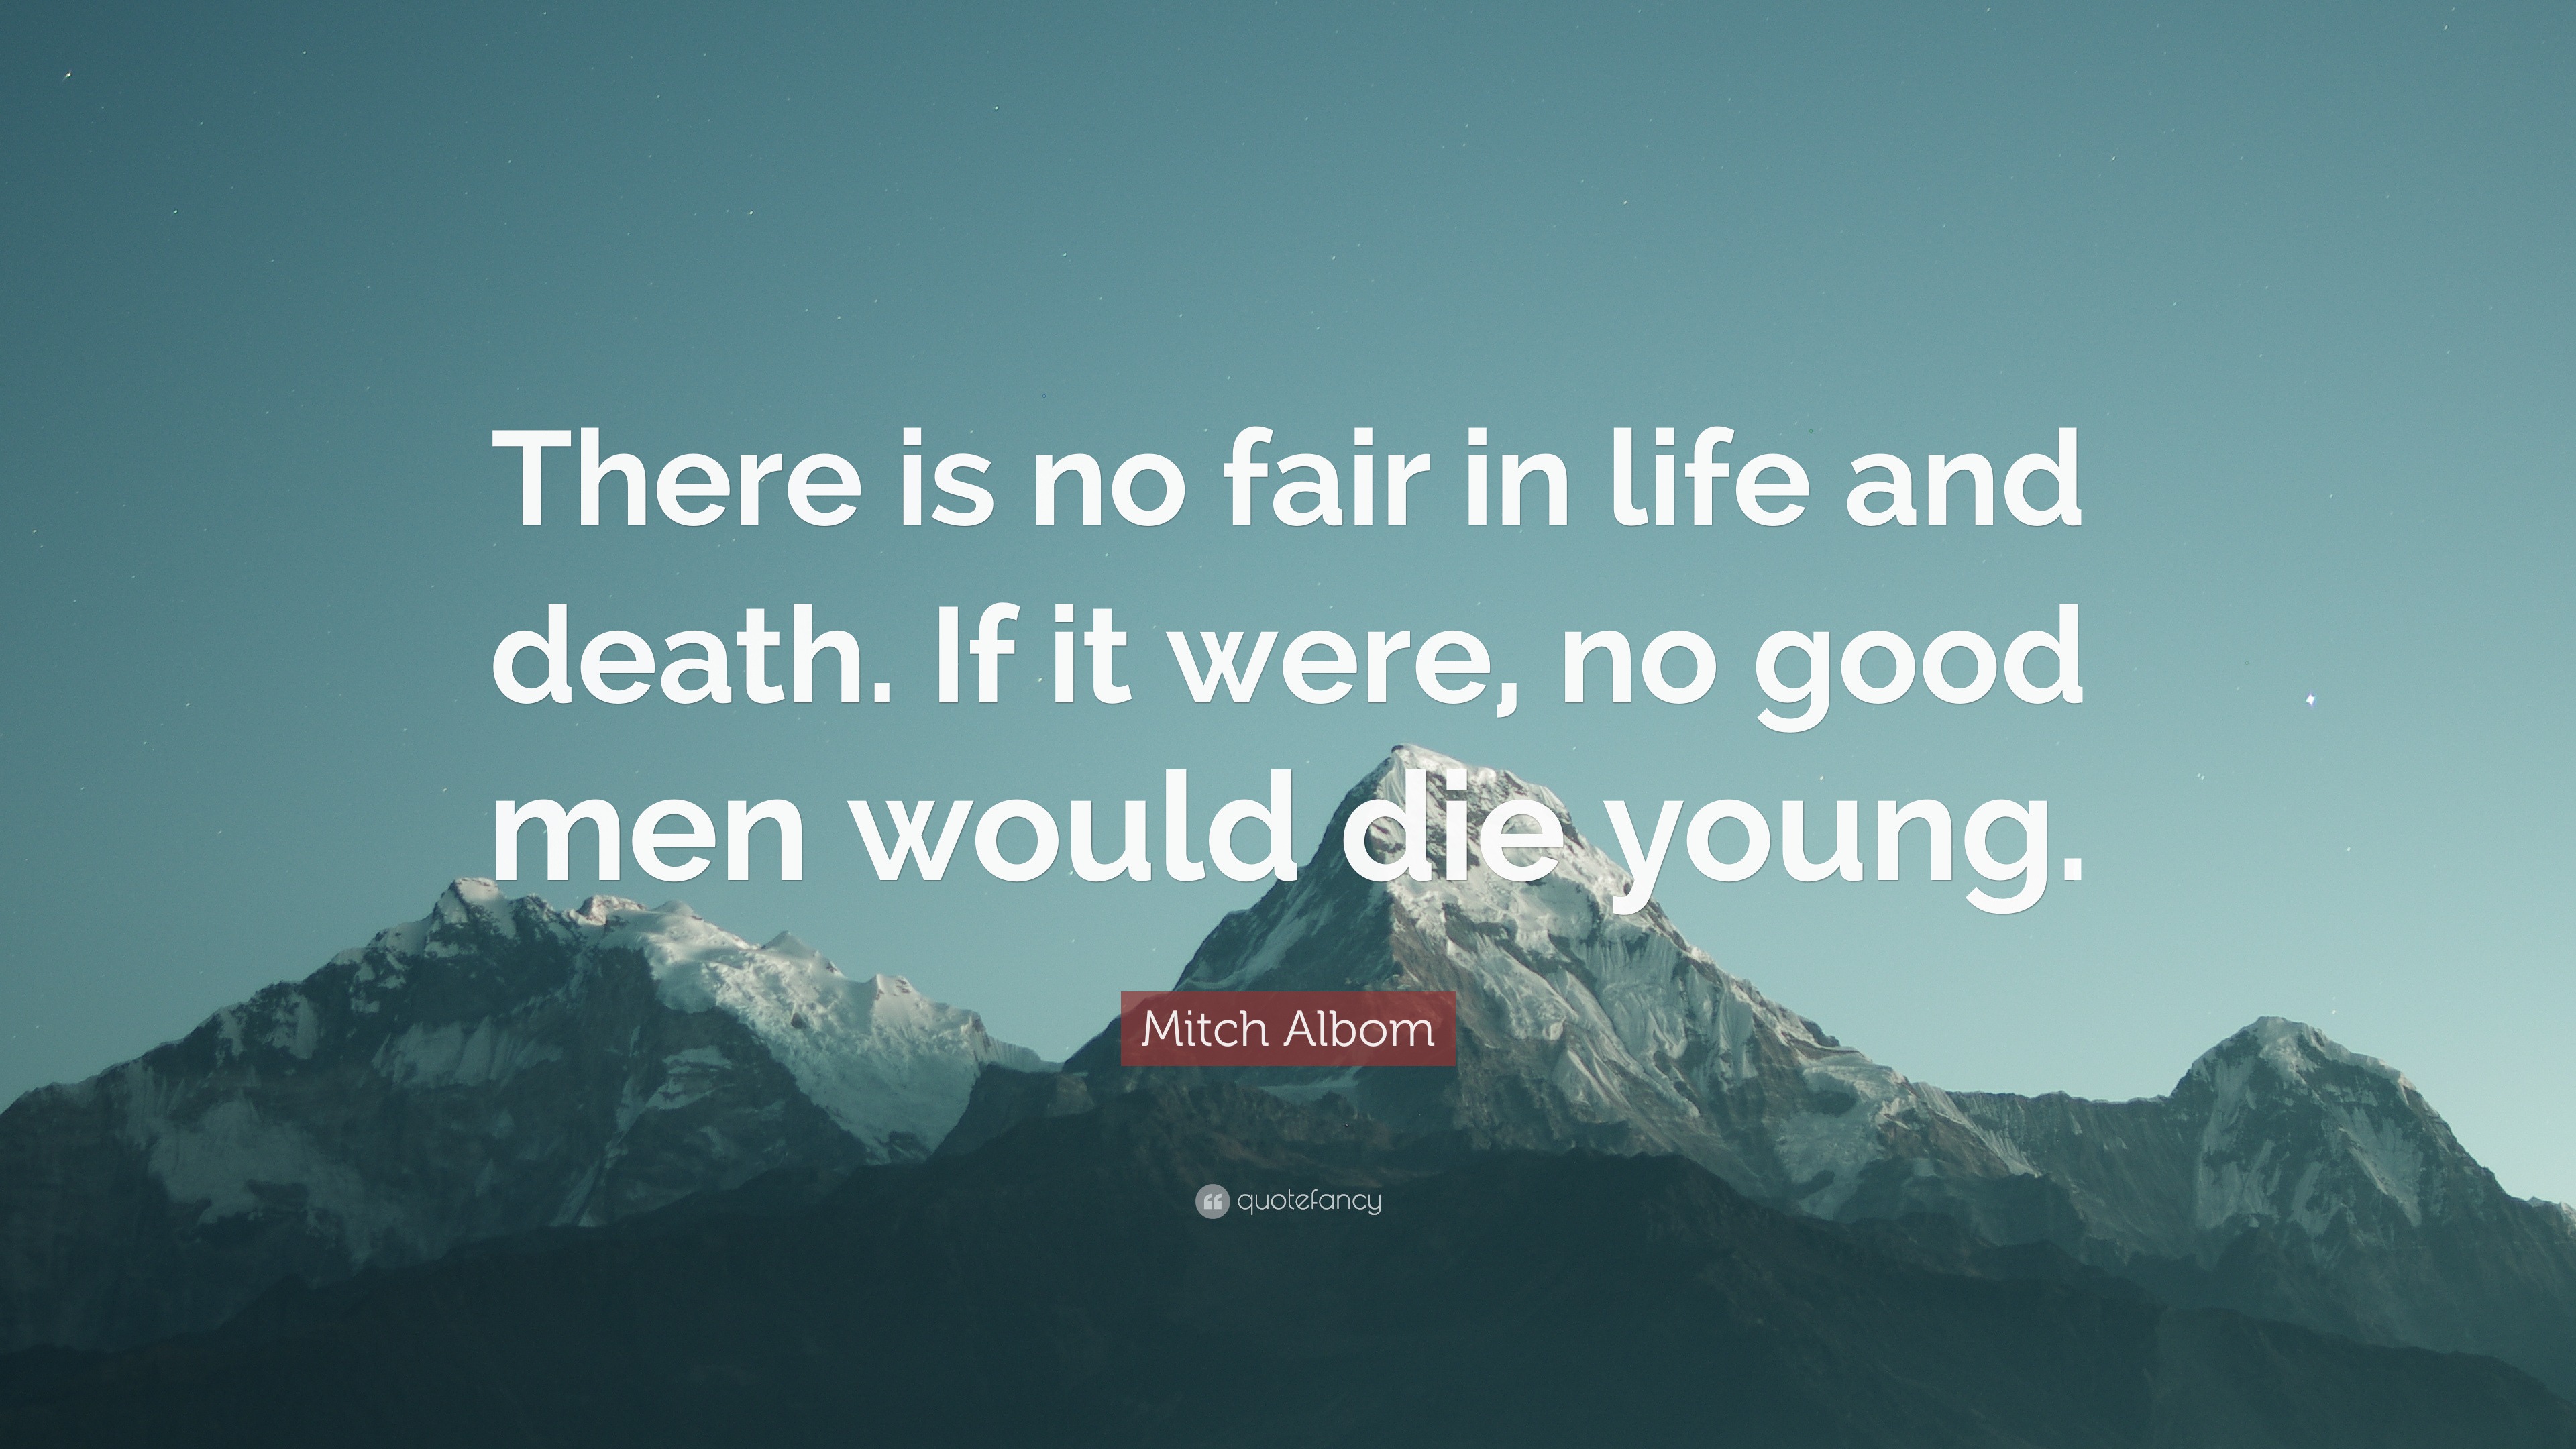 Mitch Albom Quote “There is no fair in life and If it